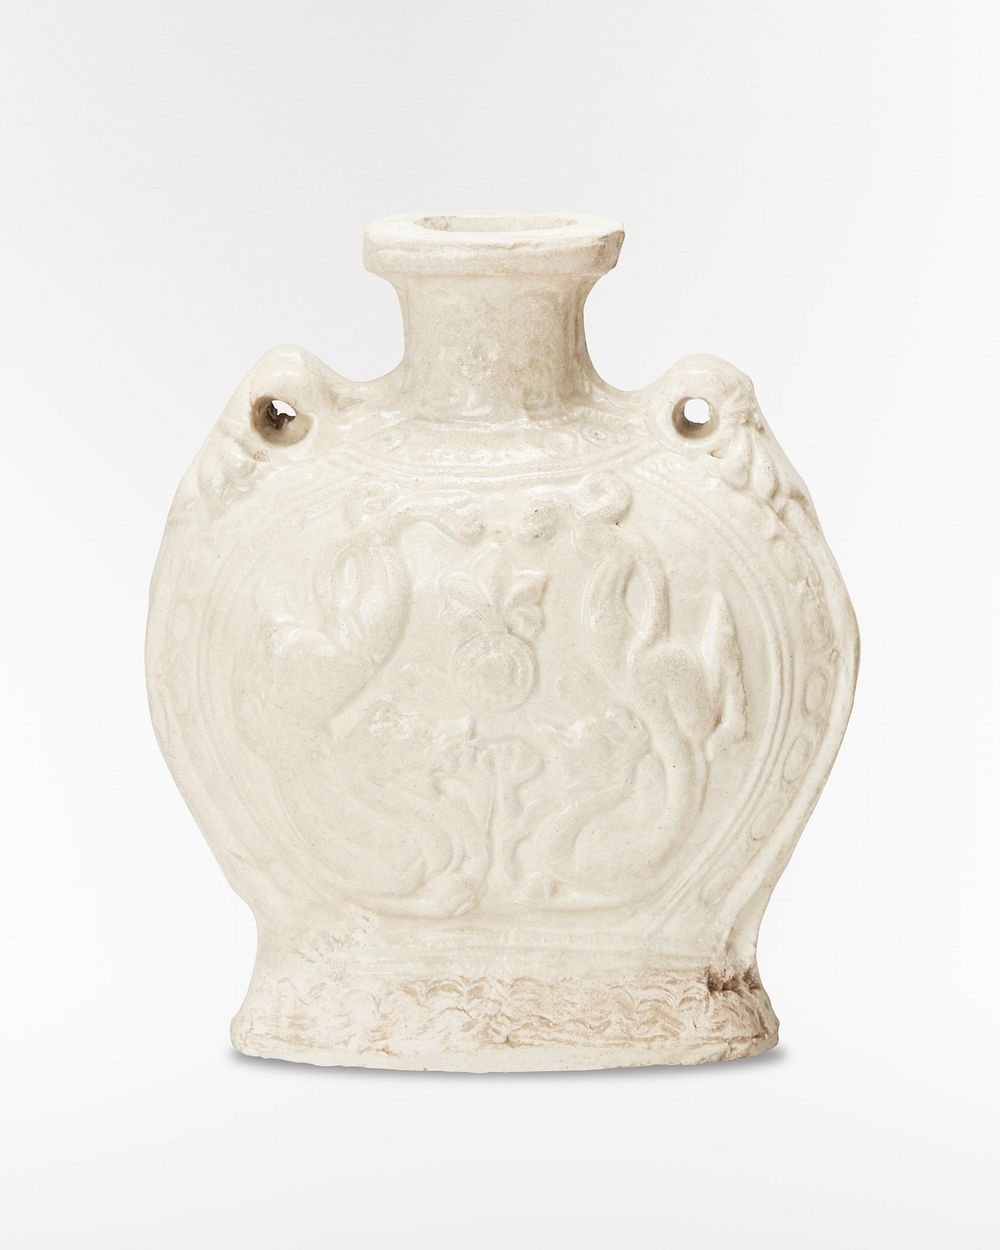 Molded flask with double dragon motif, stoneware with slip glaze. Original from The Minneapolis Institute of Art. Digitally…